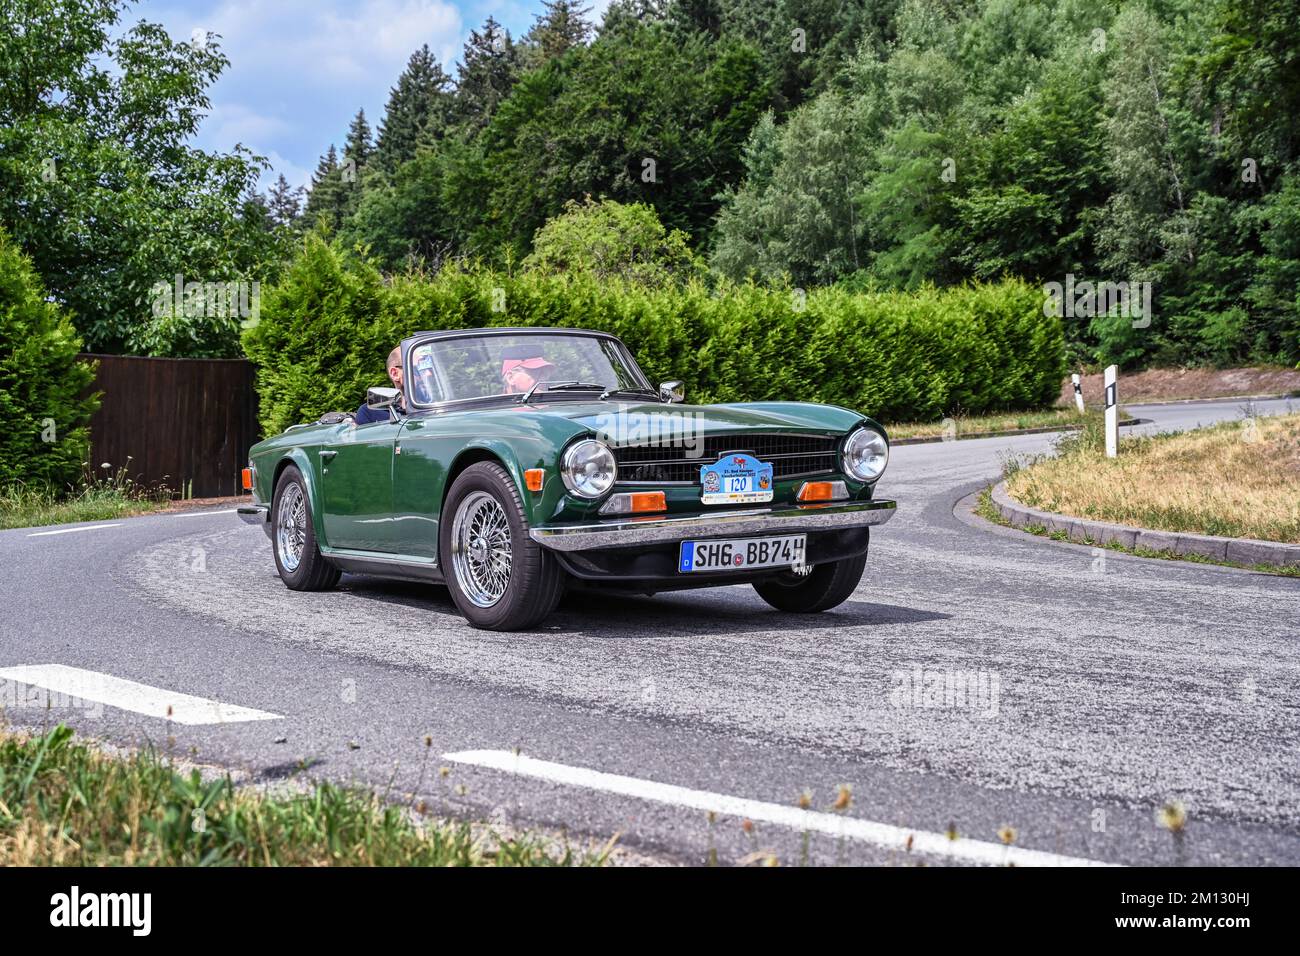 Bad König, Hesse, Germany, Triumph TR6 PI, year 1973, displacement 2.5 liters, 143 hp at the classic car festival. Body from Karman Stock Photo